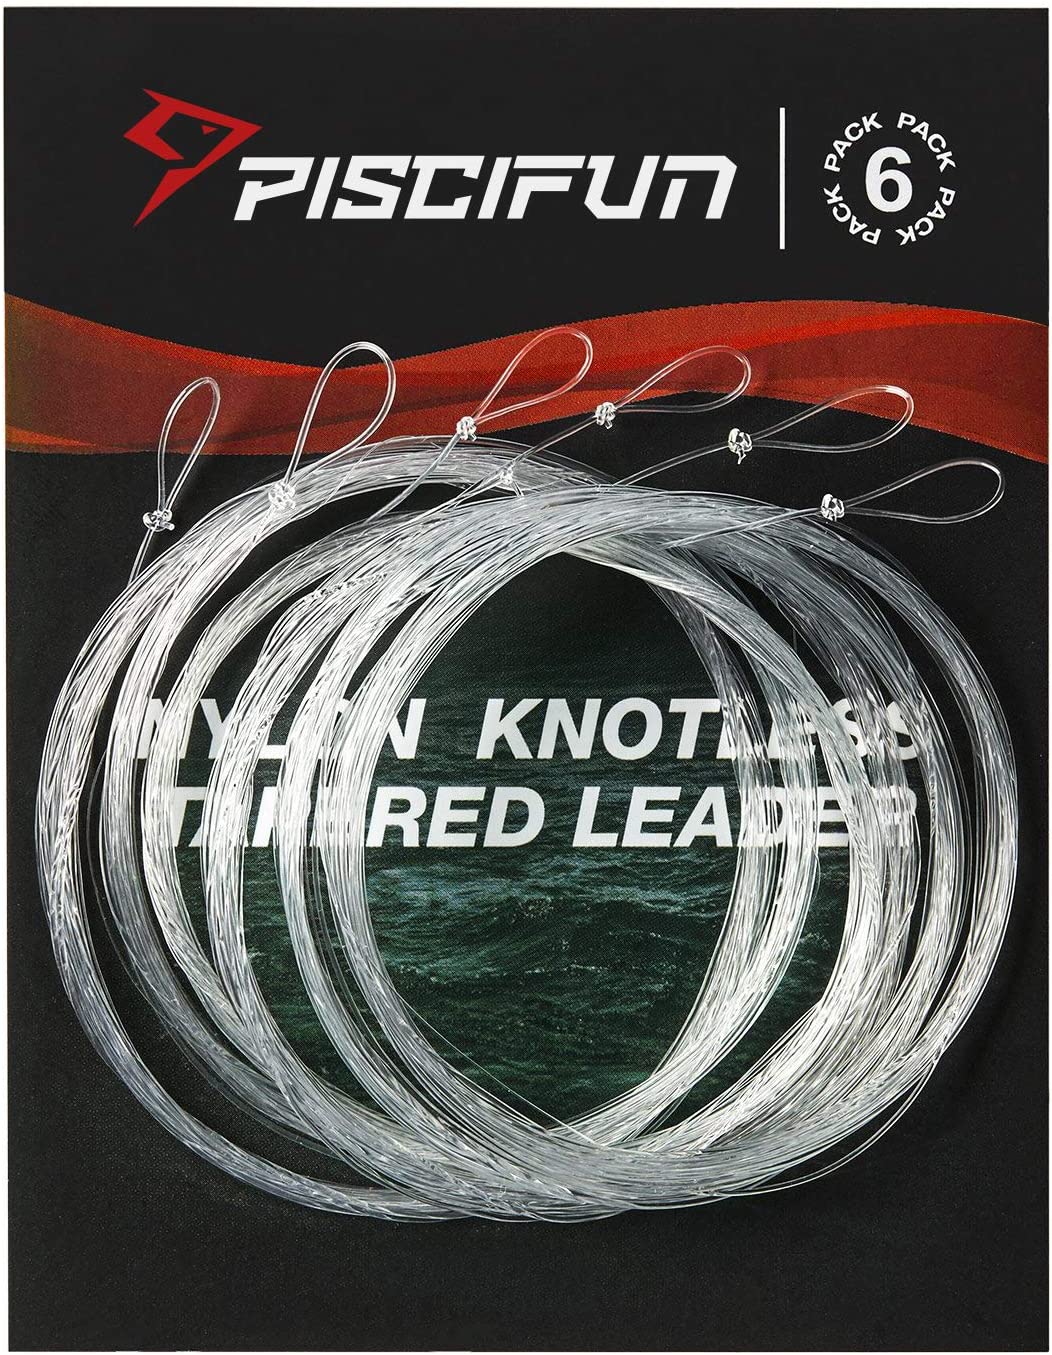 Piscifun Fly Fishing Tapered Leader with Loop-9ft 7.5ft 12ft(6